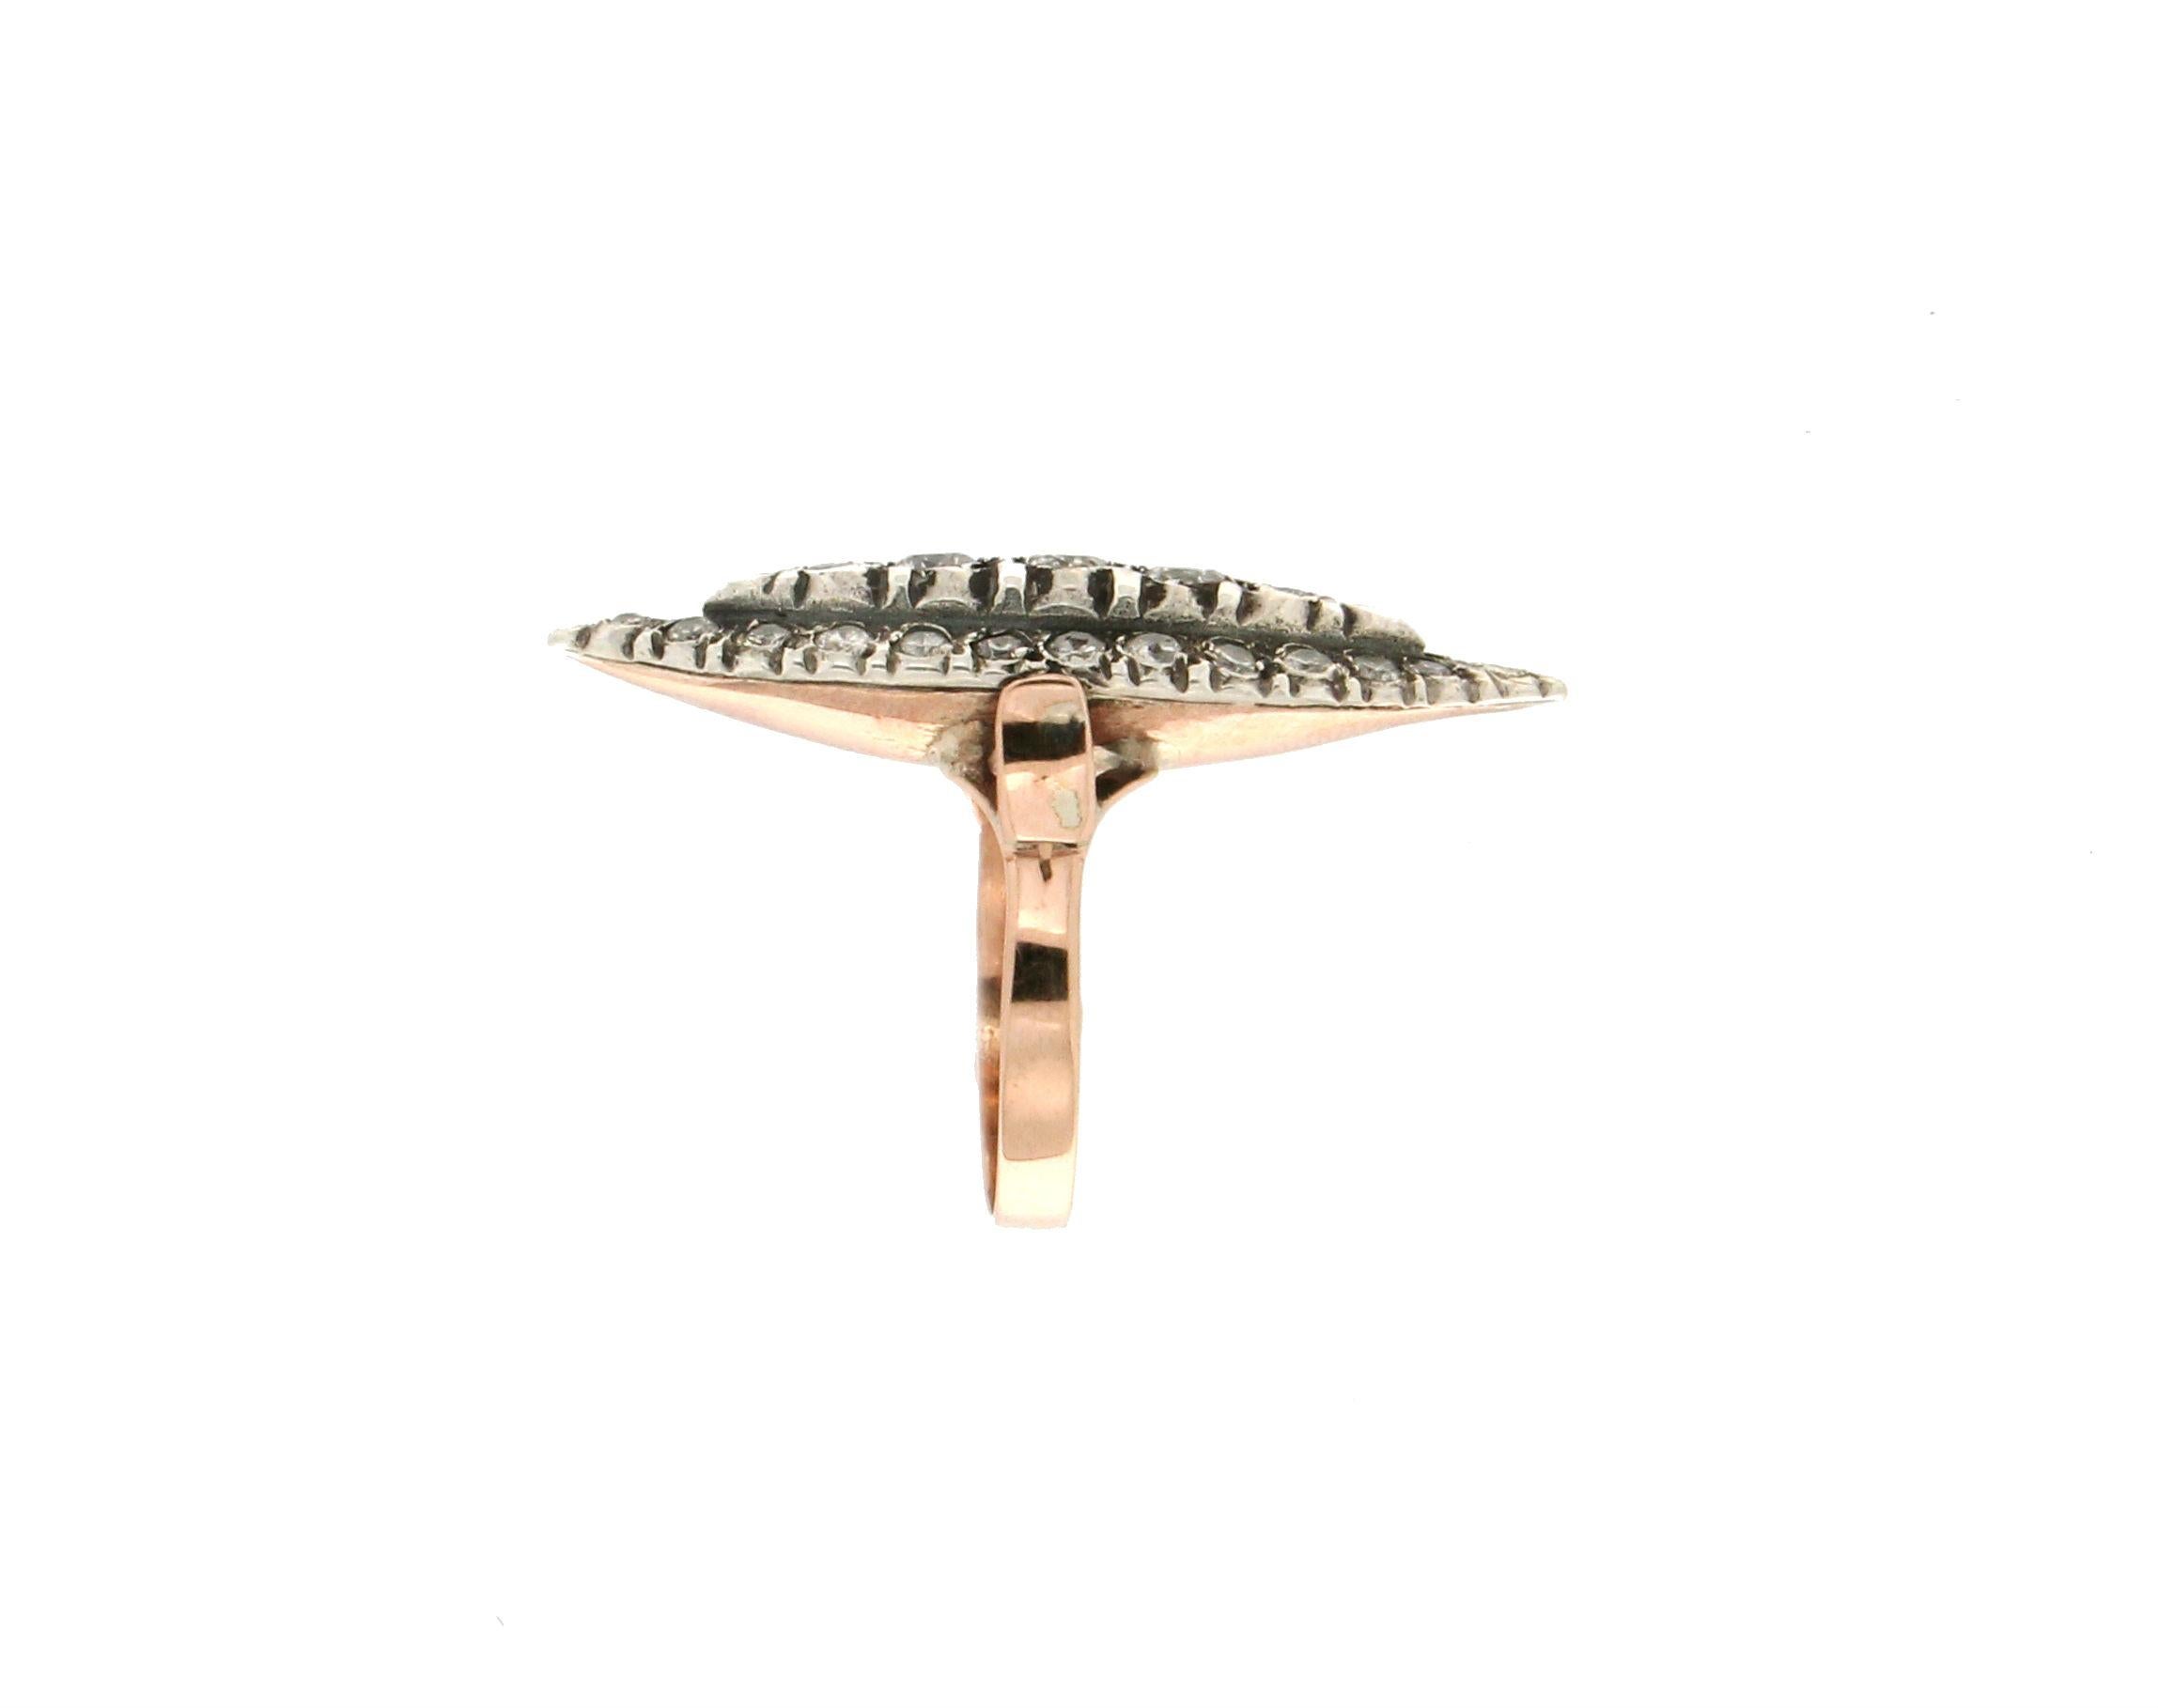 9 Karat yellow gold and 925 karat silver cocktail ring. Handmade assembled with diamonds.

Ring total weight 7.10 grams
Diamonds weight 1.25 karat
Ring size ITA 15 - US 7.25